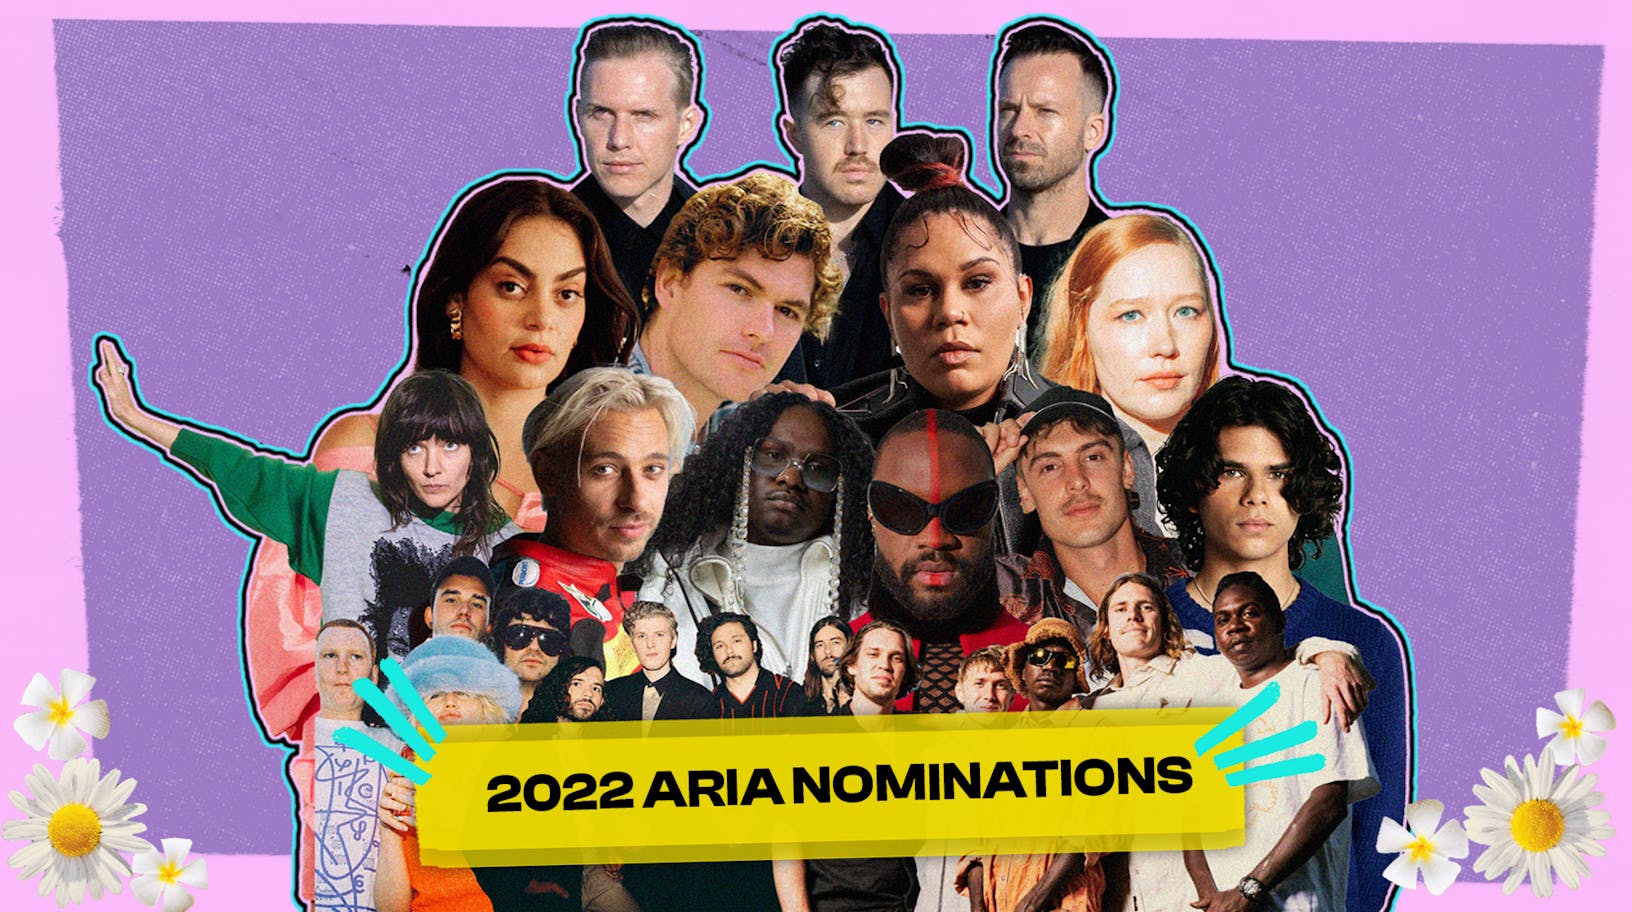 The 2022 ARIA Awards nominees are here